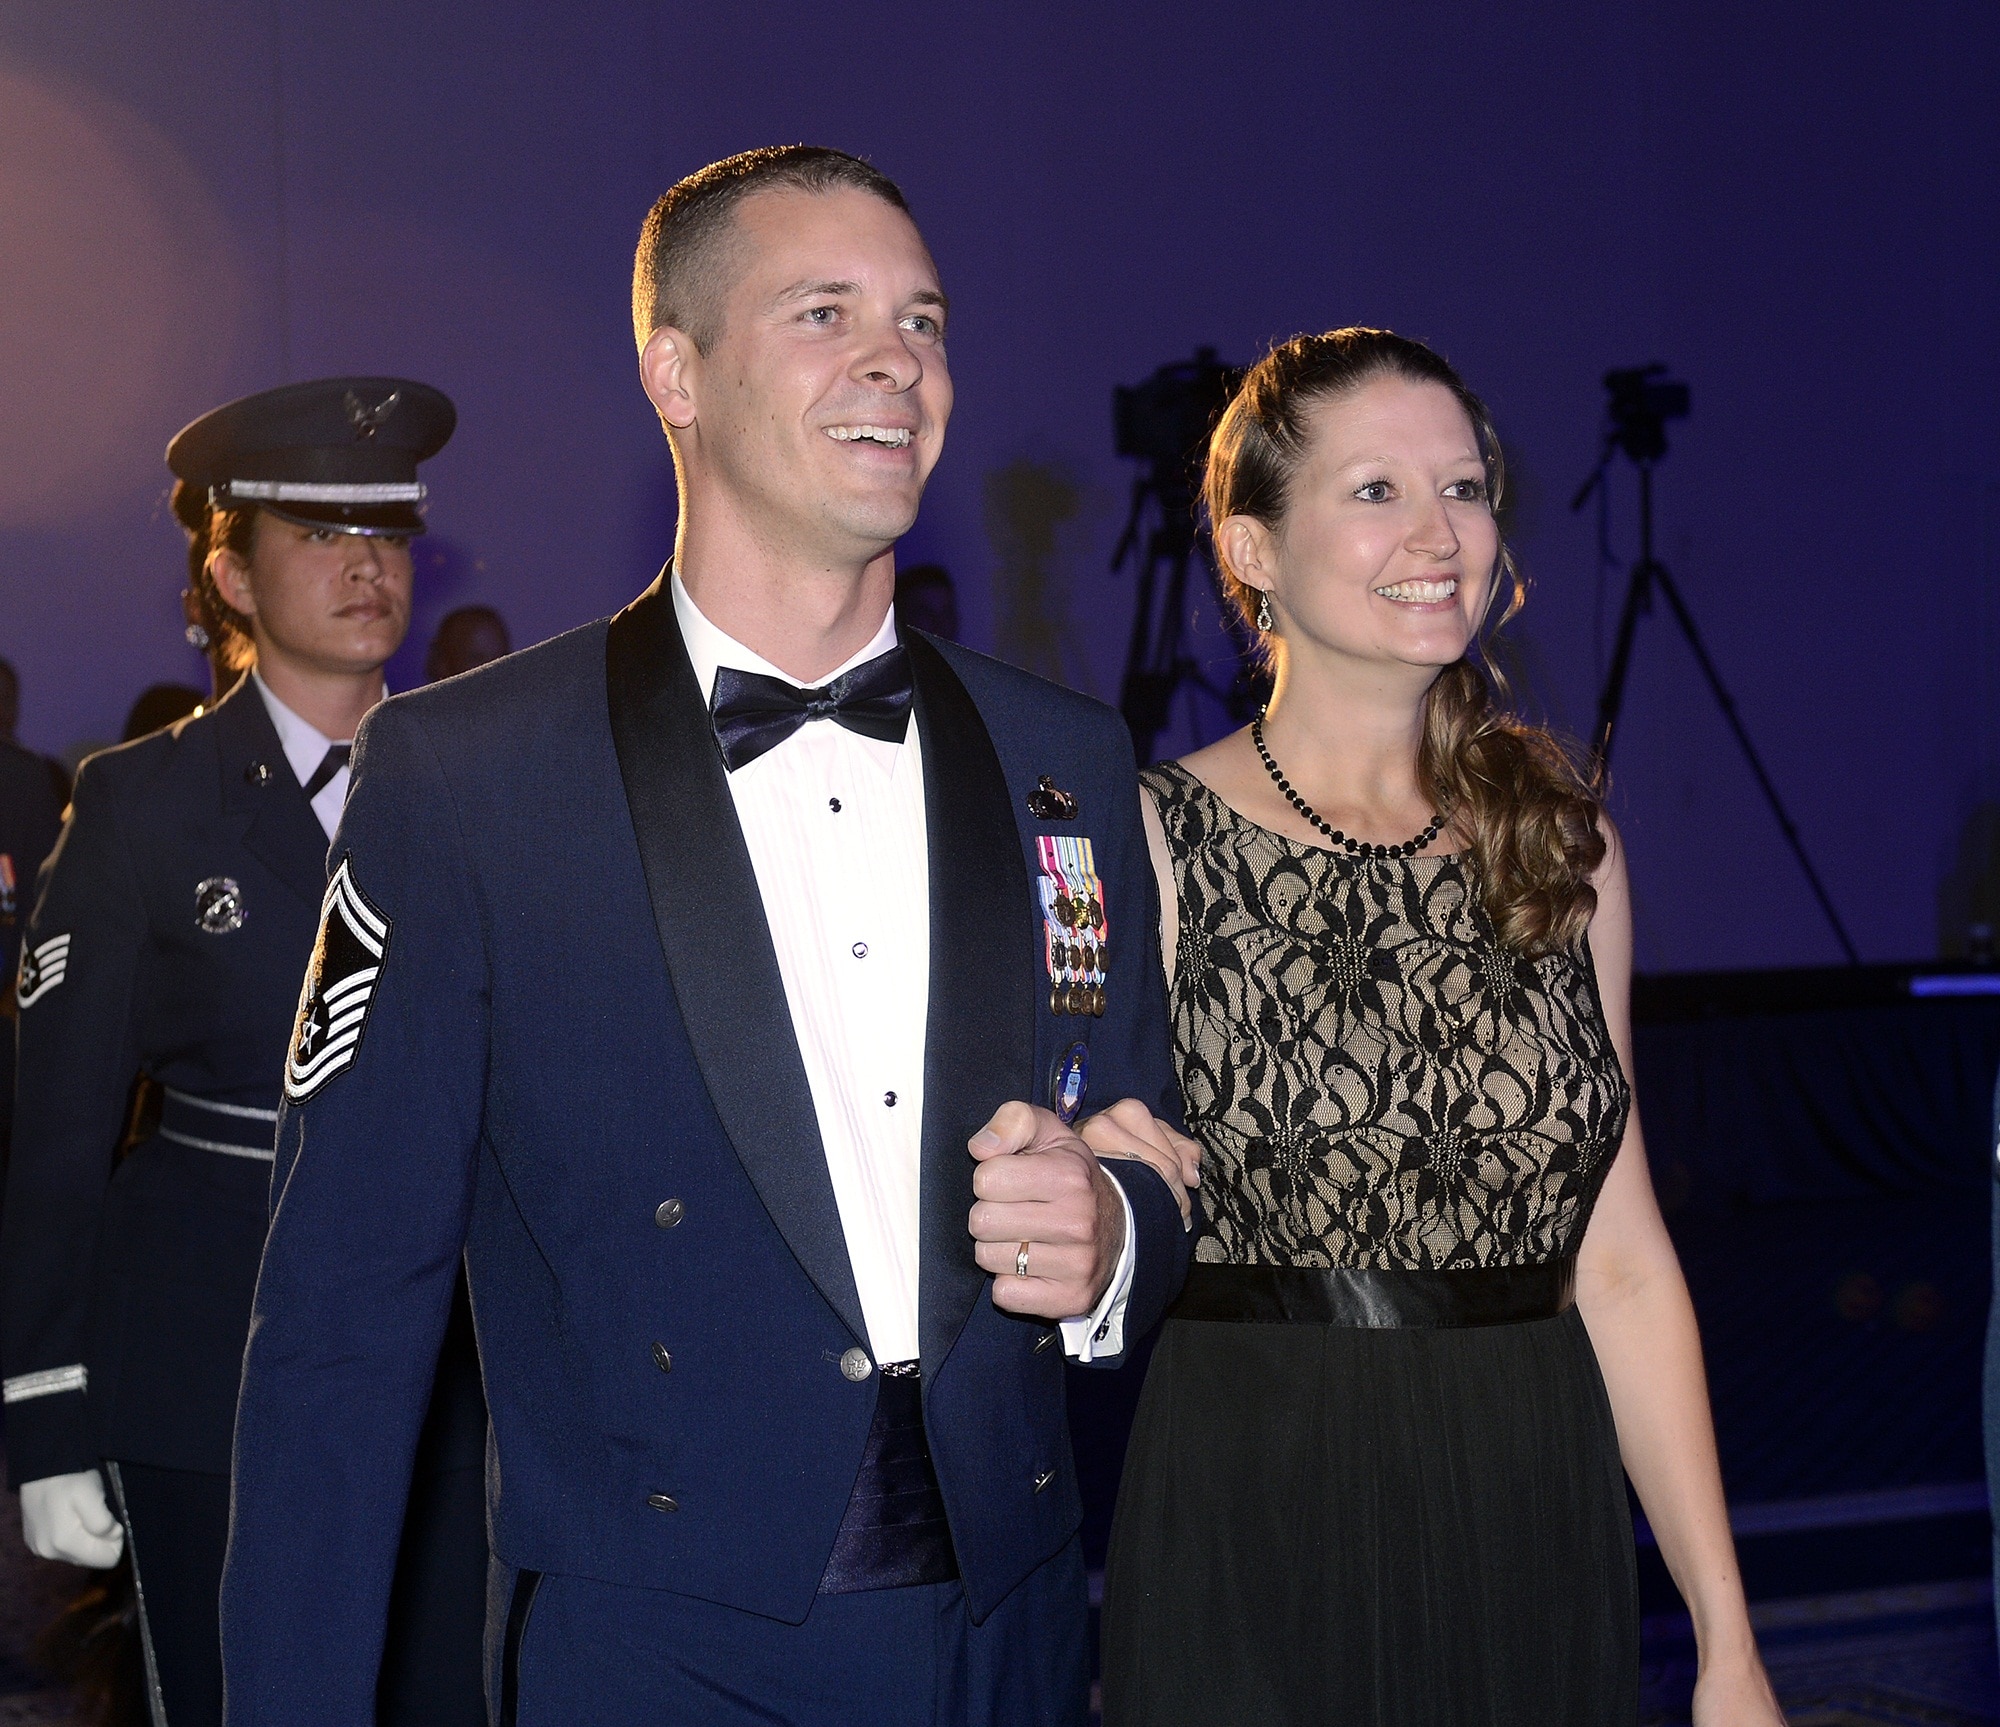 Senior Master Sgt. Michael J. Venning, from the Directorate of Contracting, Headquarters, Air Force Materiel Command, Wright Patterson Air Force Base, Ohio and his wife attended a reception and awards dinner during the 2014 Air Force Association Air & Space Conference and Technology Exposition on Sept. 15, 2014, in Washington, D.C. Venning is one of the 12 Outstanding Airmen of the Year for 2014 who were honored during the reception. (U.S. Air Force photo/Andy Morataya)